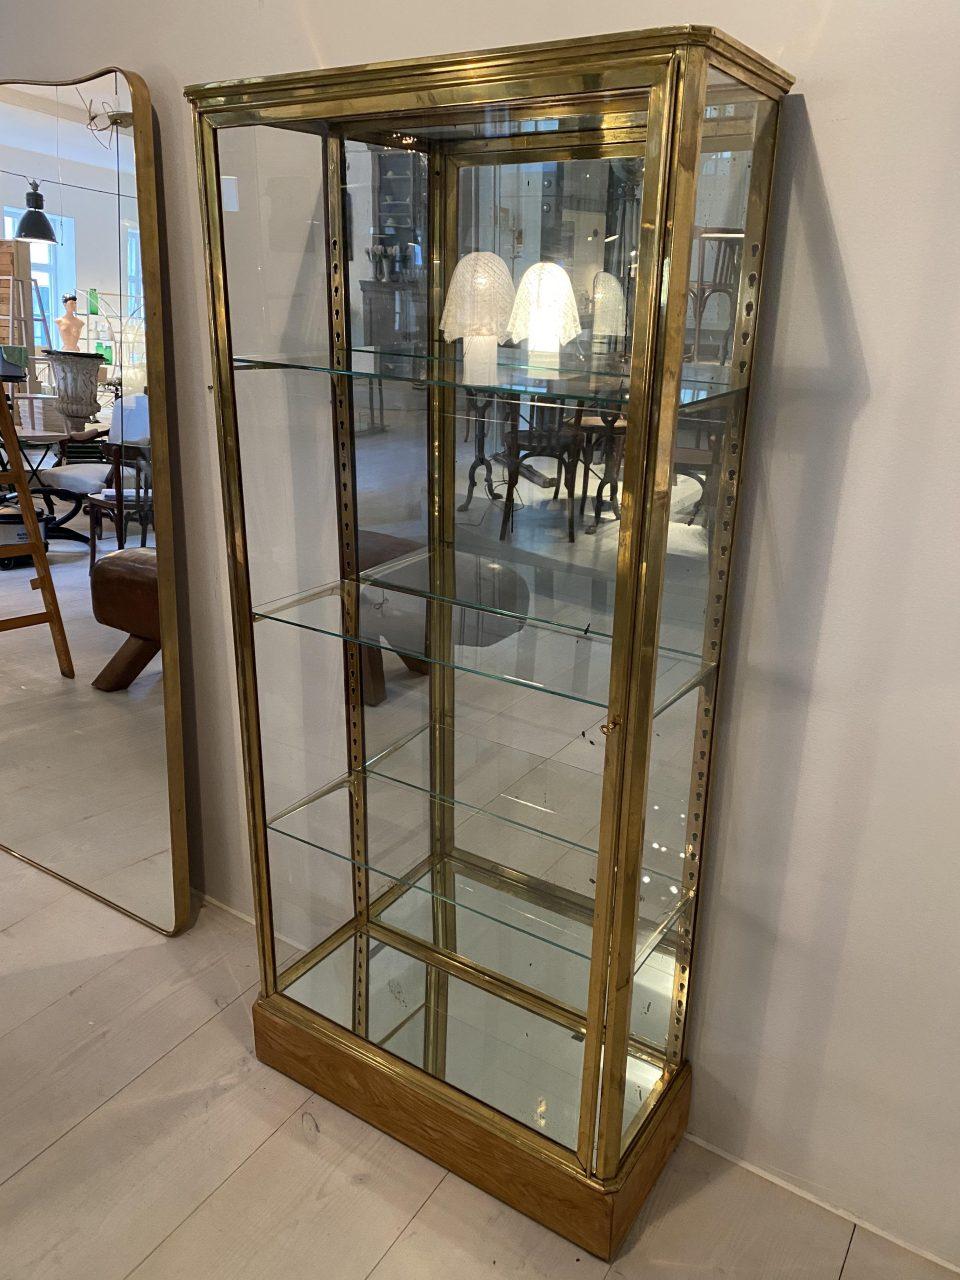 Handsome and well-proportioned display cabinet from France circa 1930s in a stringet Art Deco style. Sleek brass framed profile which comes with its associated key, 3 beautiful faceted glass shelves and adjustable shelf brackets in brass, and a